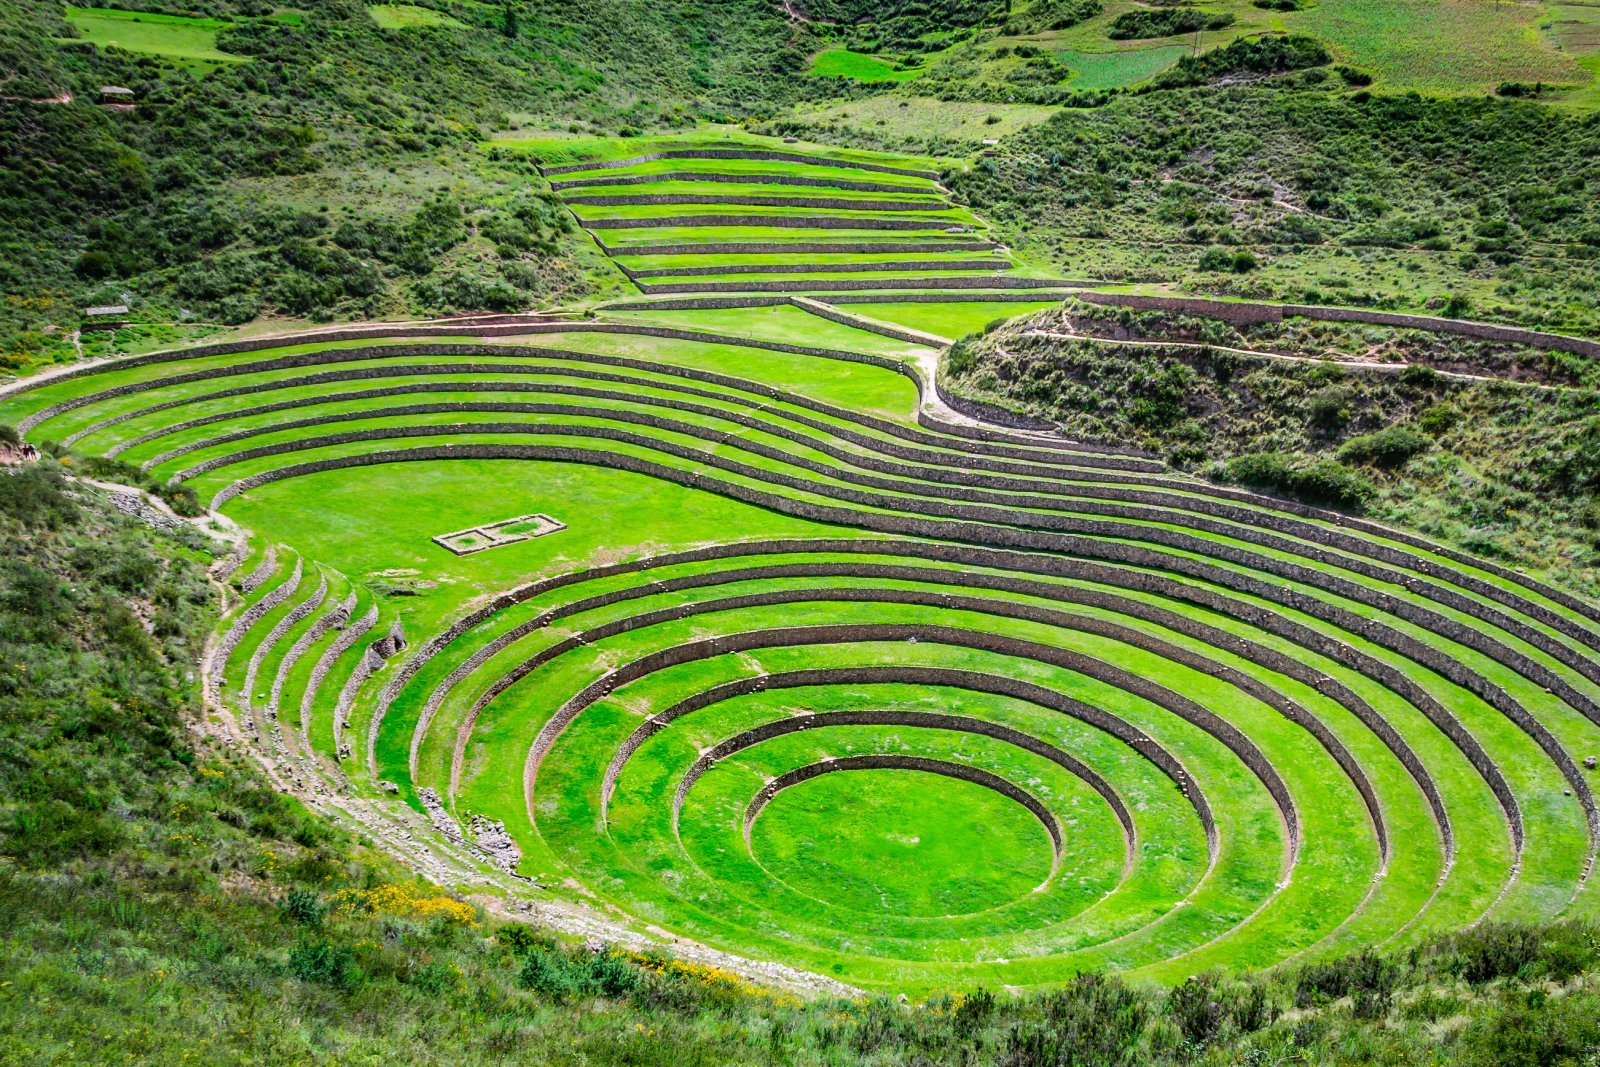 <p class="wp-caption-text">Image Credit: Shutterstock / Tetyana Dotsenko</p>  <p><span>While not in the Amazon, the Sacred Valley near Cusco is vital to Peru’s rich tapestry of spiritual traditions, including those with roots in Amazonian shamanism. The valley is a serene landscape of towering Andean peaks and ancient Inca ruins, where traditional Andean and Amazonian spiritual practices merge. </span></p>